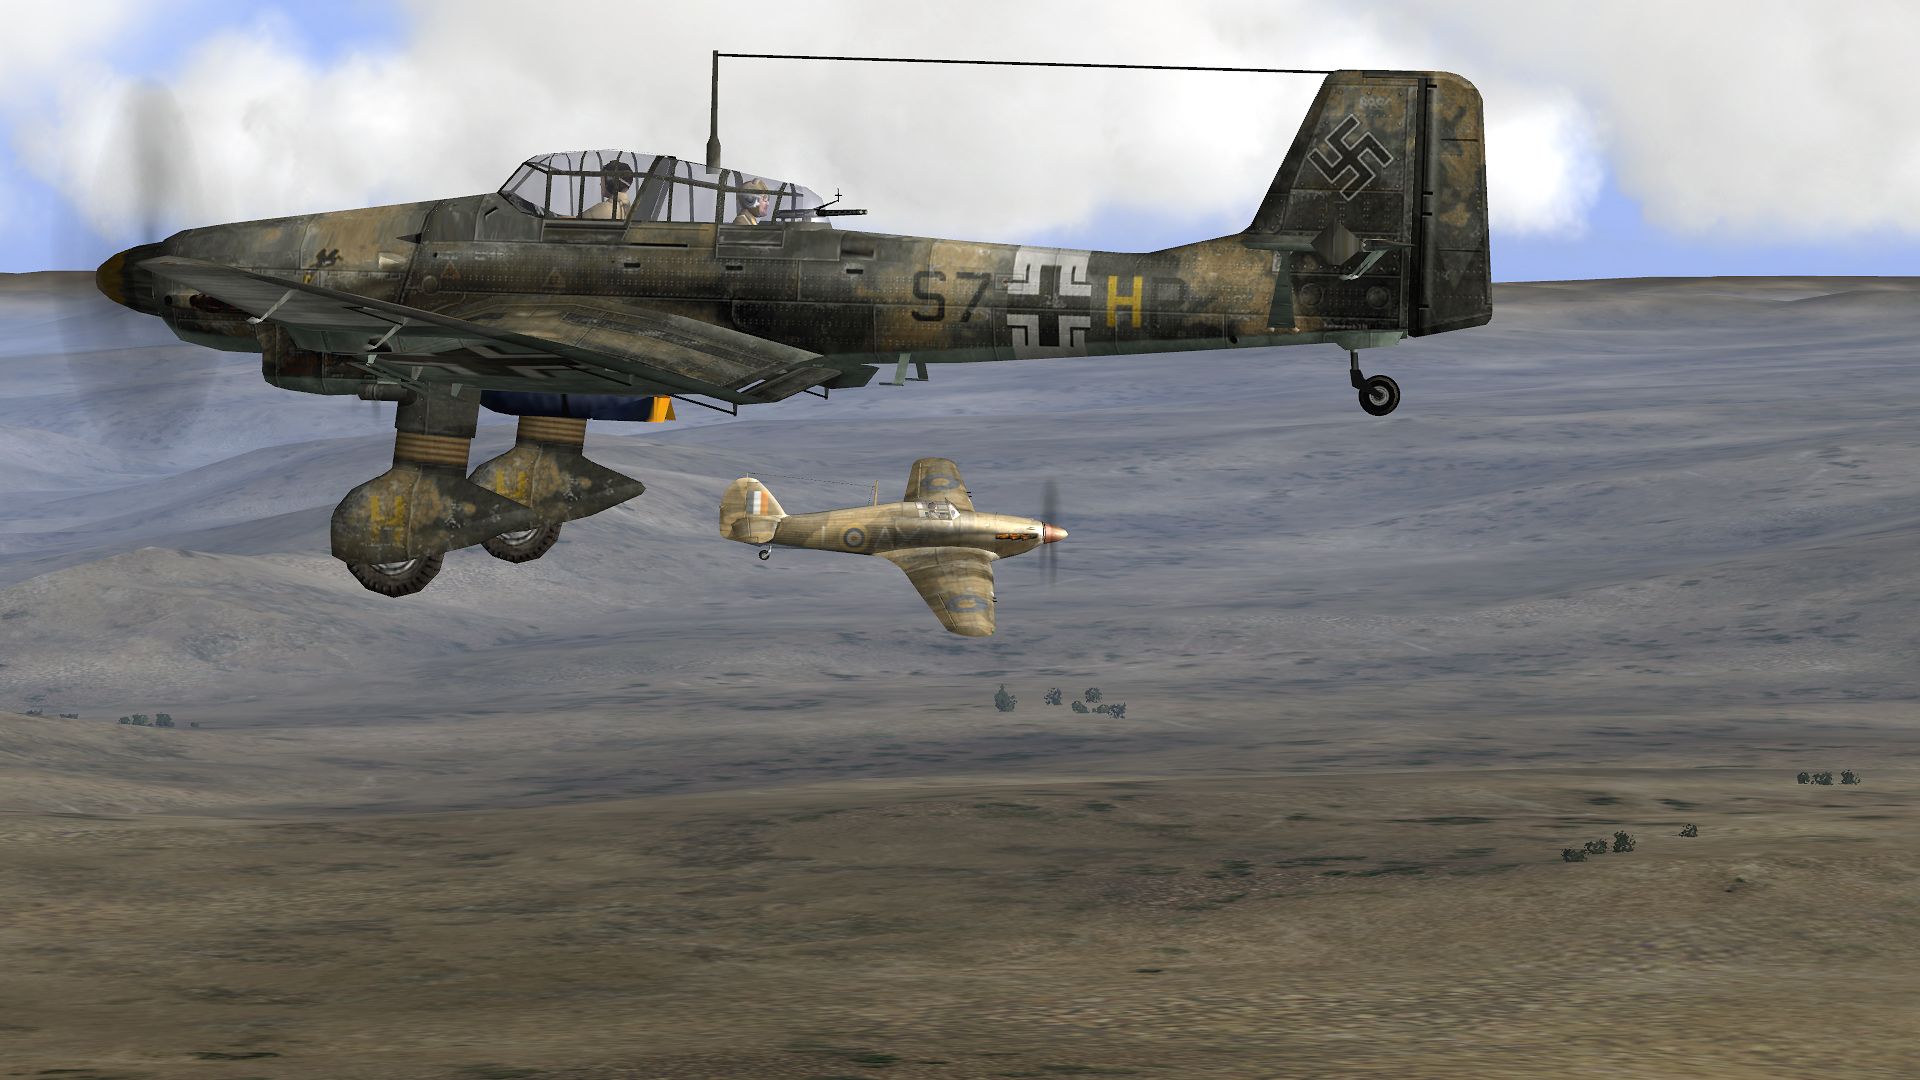 DogfightS7HP